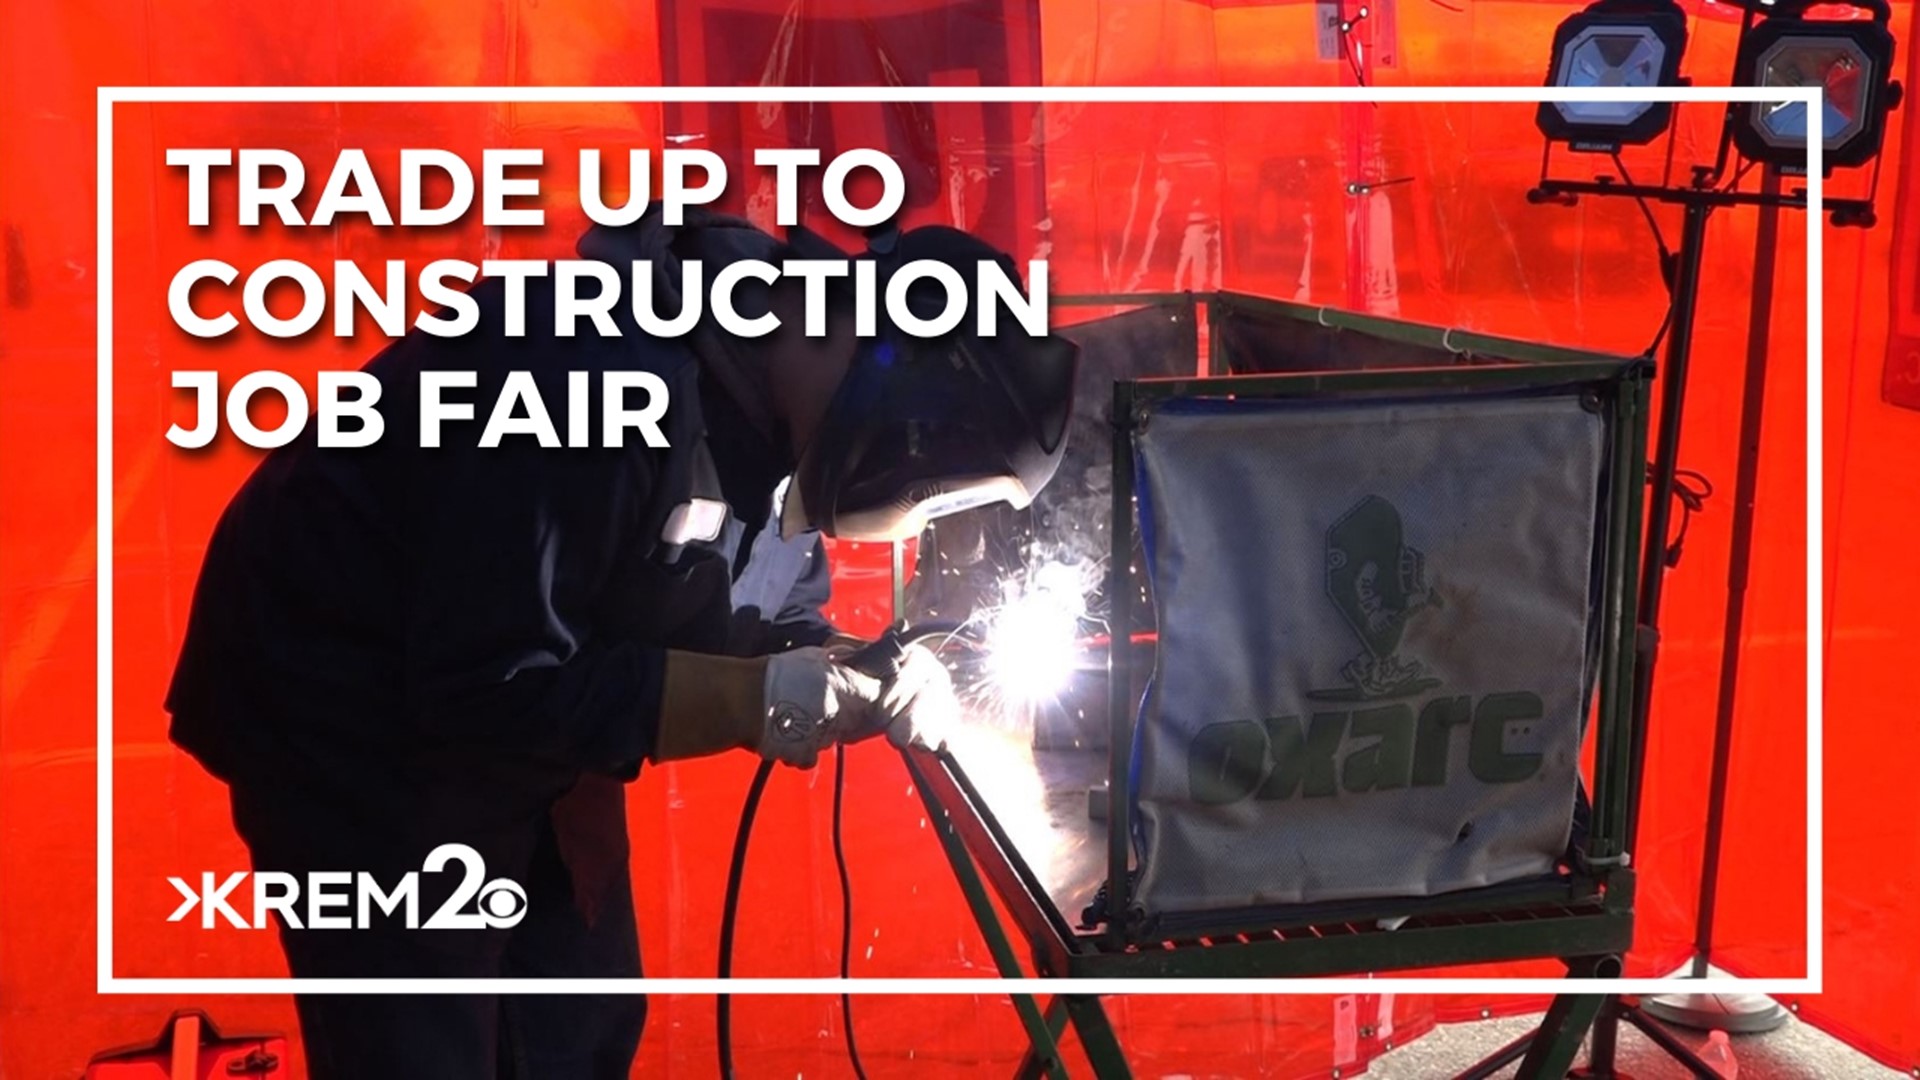 The fair took place Wednesday, March 29 at the Spokane County Fair & Expo Center. It will end by 7 p.m. AGC has over 60 construction positions available.